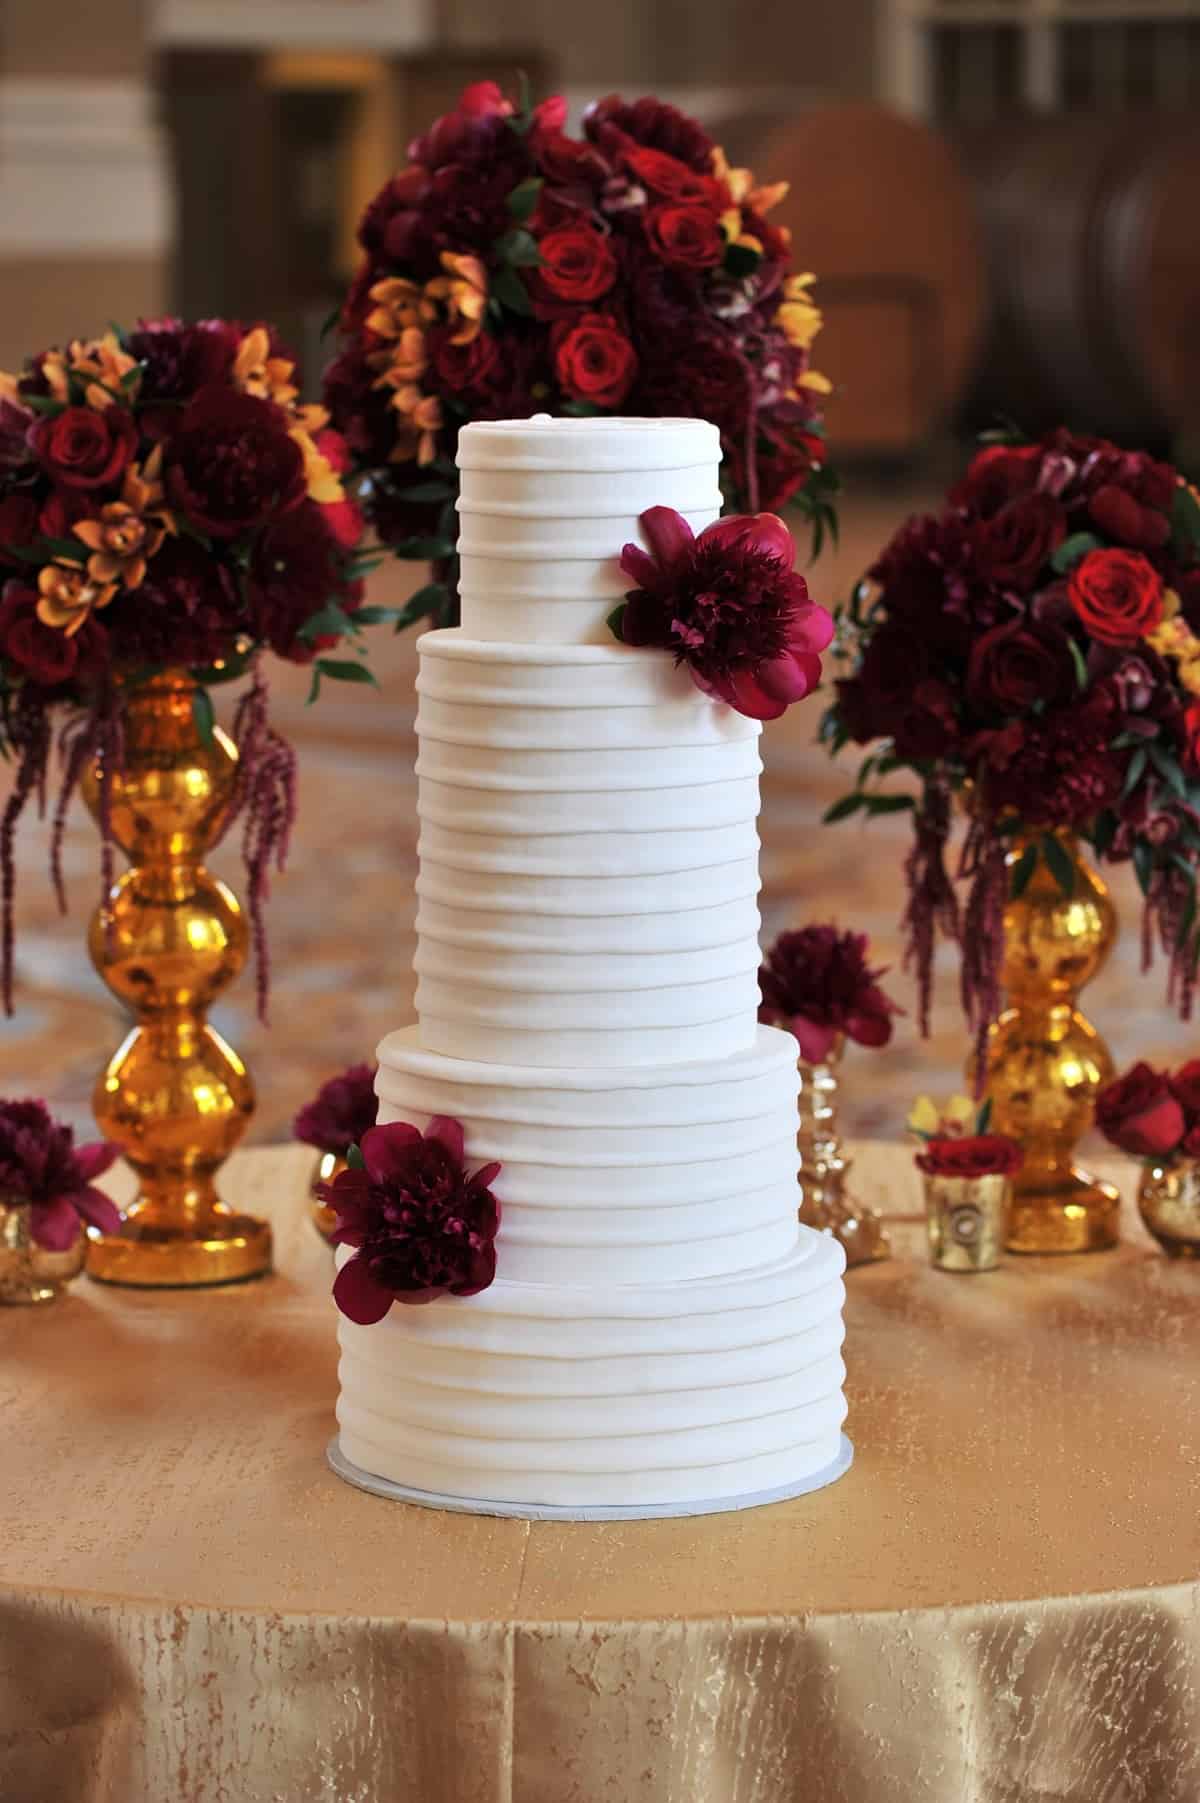 Four tiered white wedding cake with red flowers.